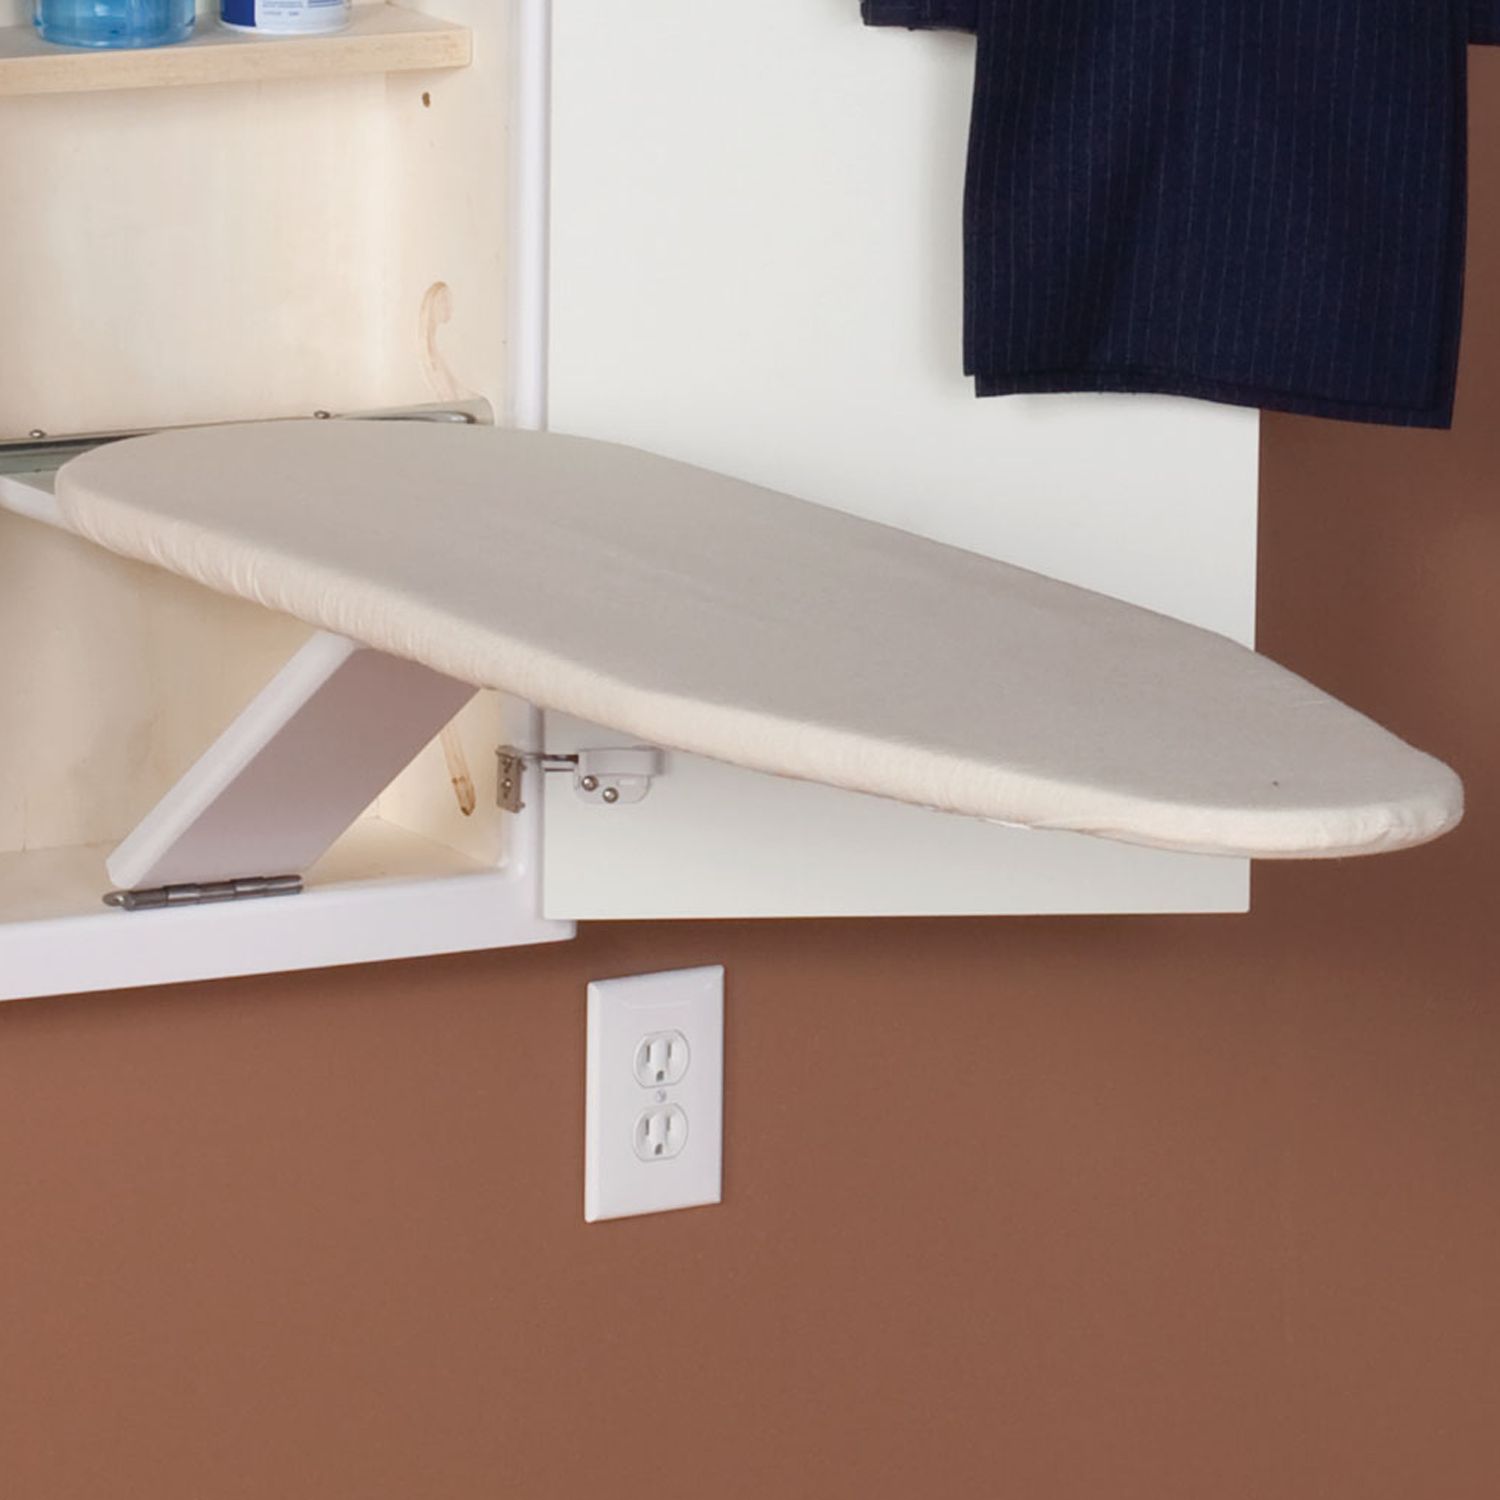 A compact fold-out ironing board is a laundry room essential that won't take up too much space.